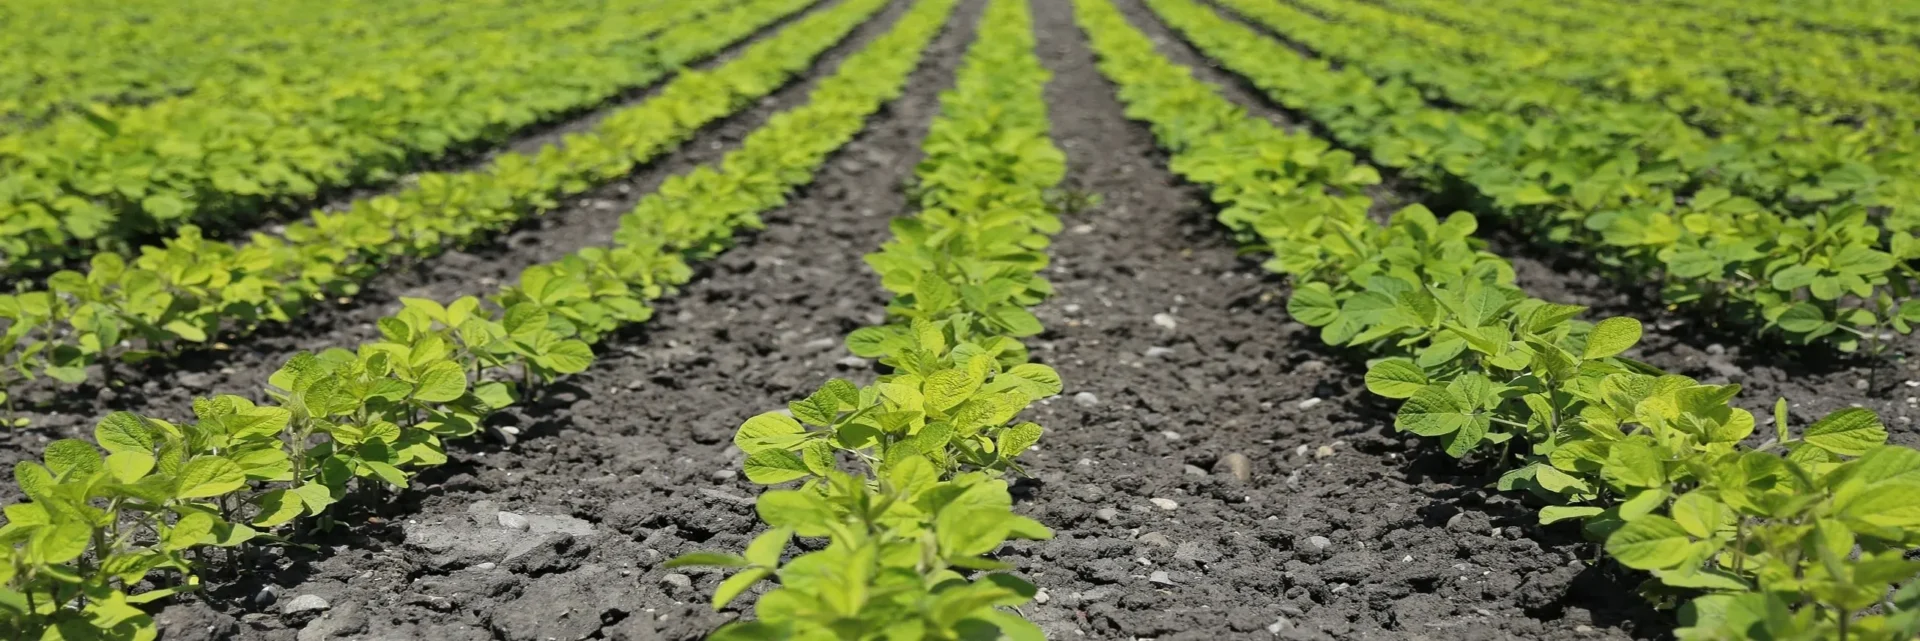 A field of green plants growing in the dirt.